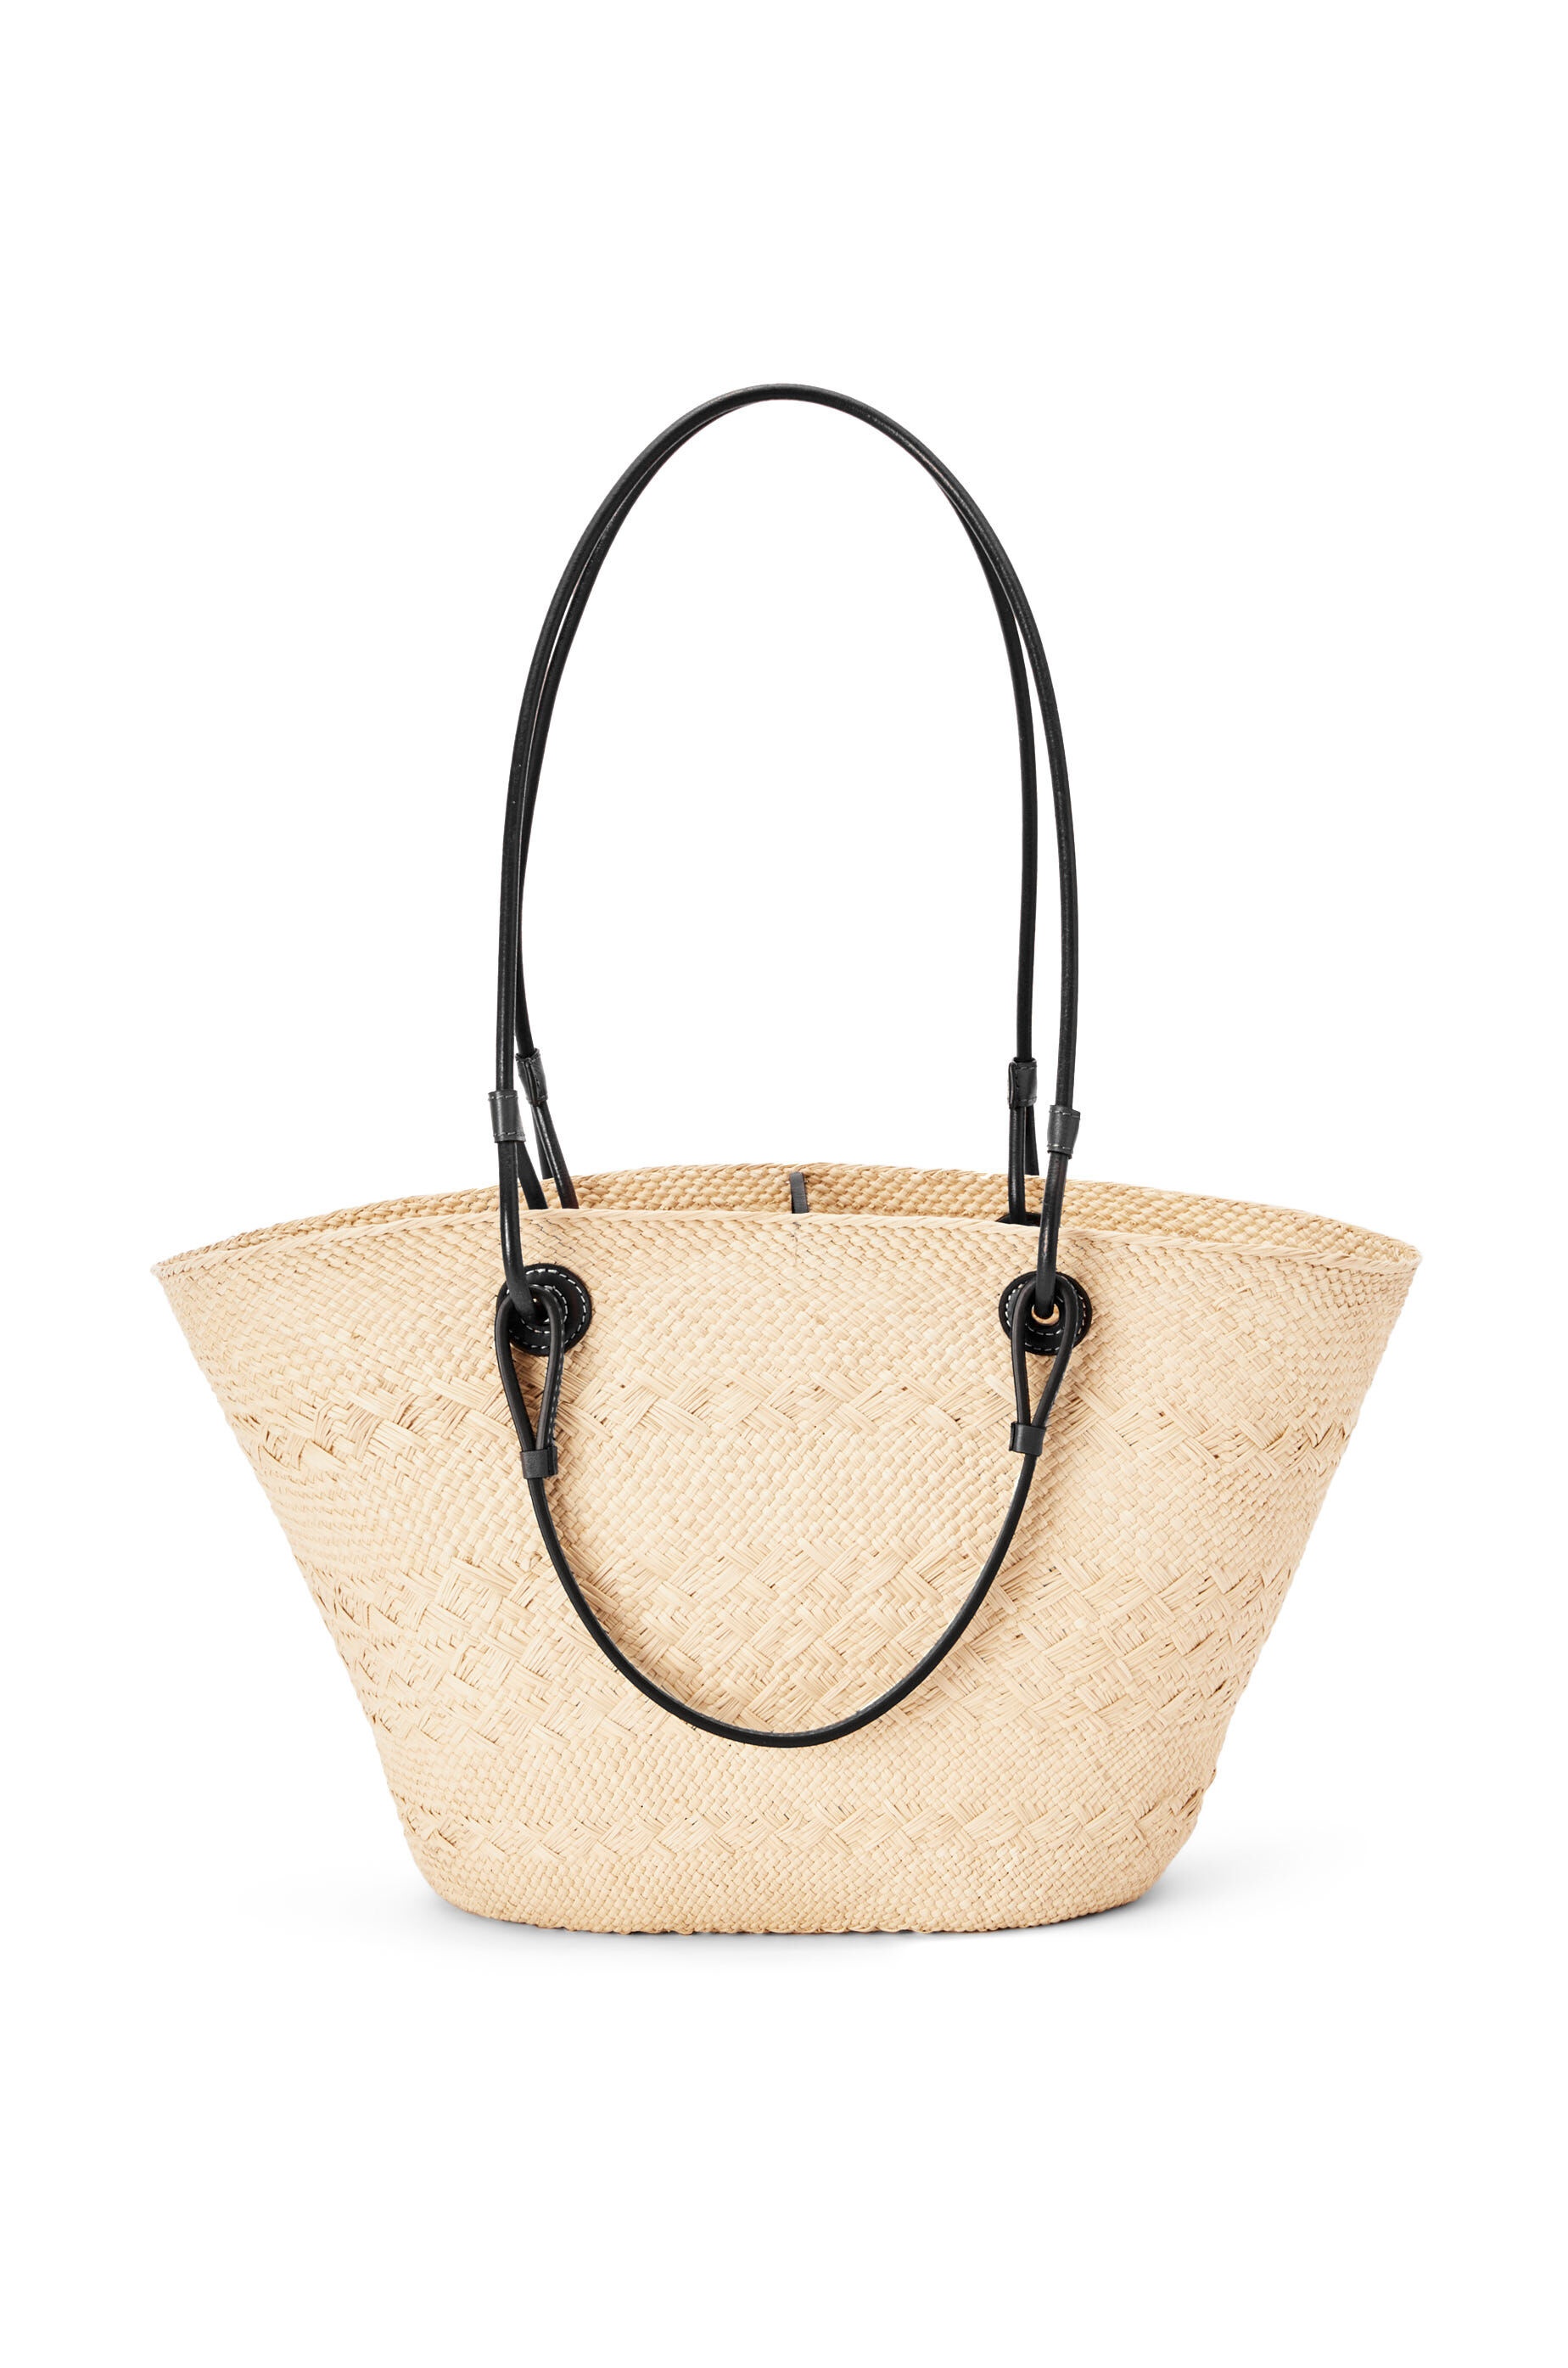 Anagram Basket bag in iraca palm and calfskin - 4